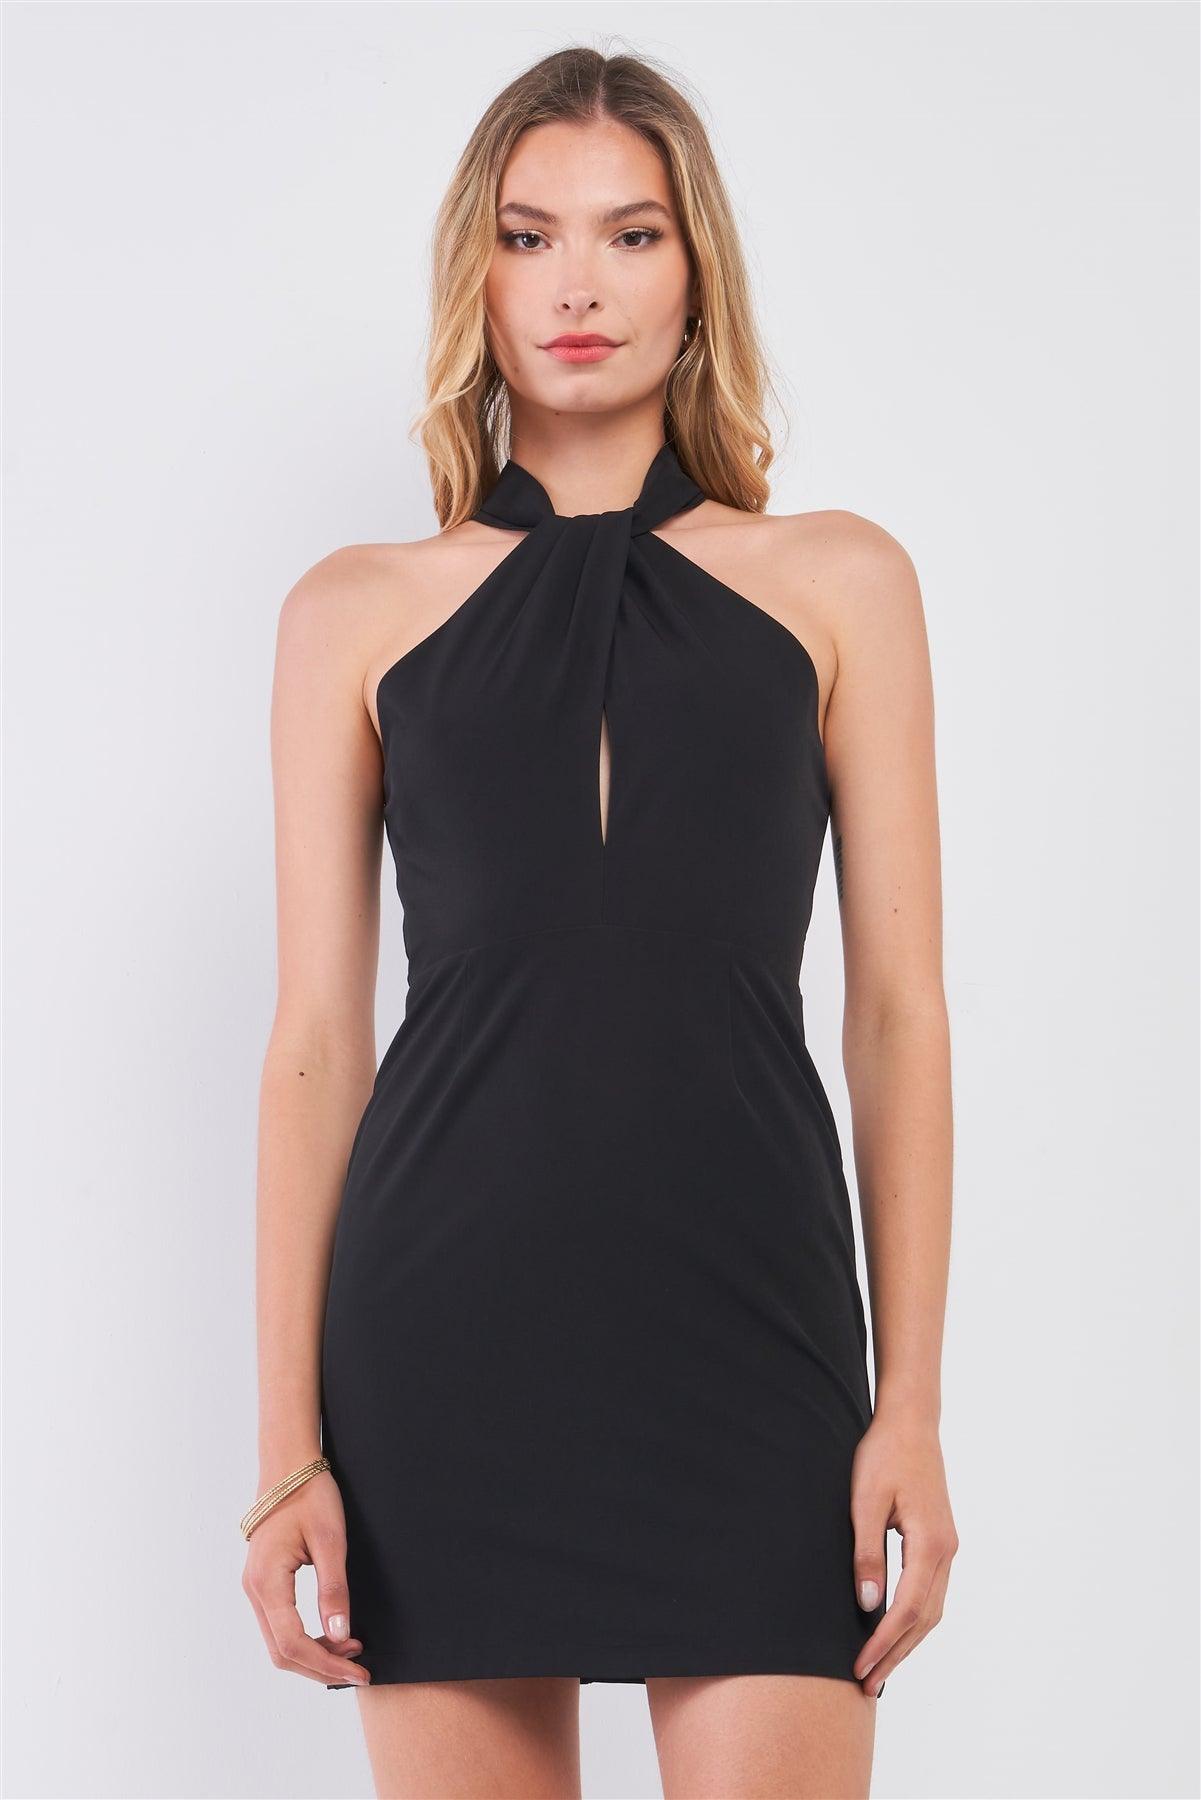 Black Sleeveless Twisted Front Detail Halter Neck Structured Mini Dress /1-2-2-1